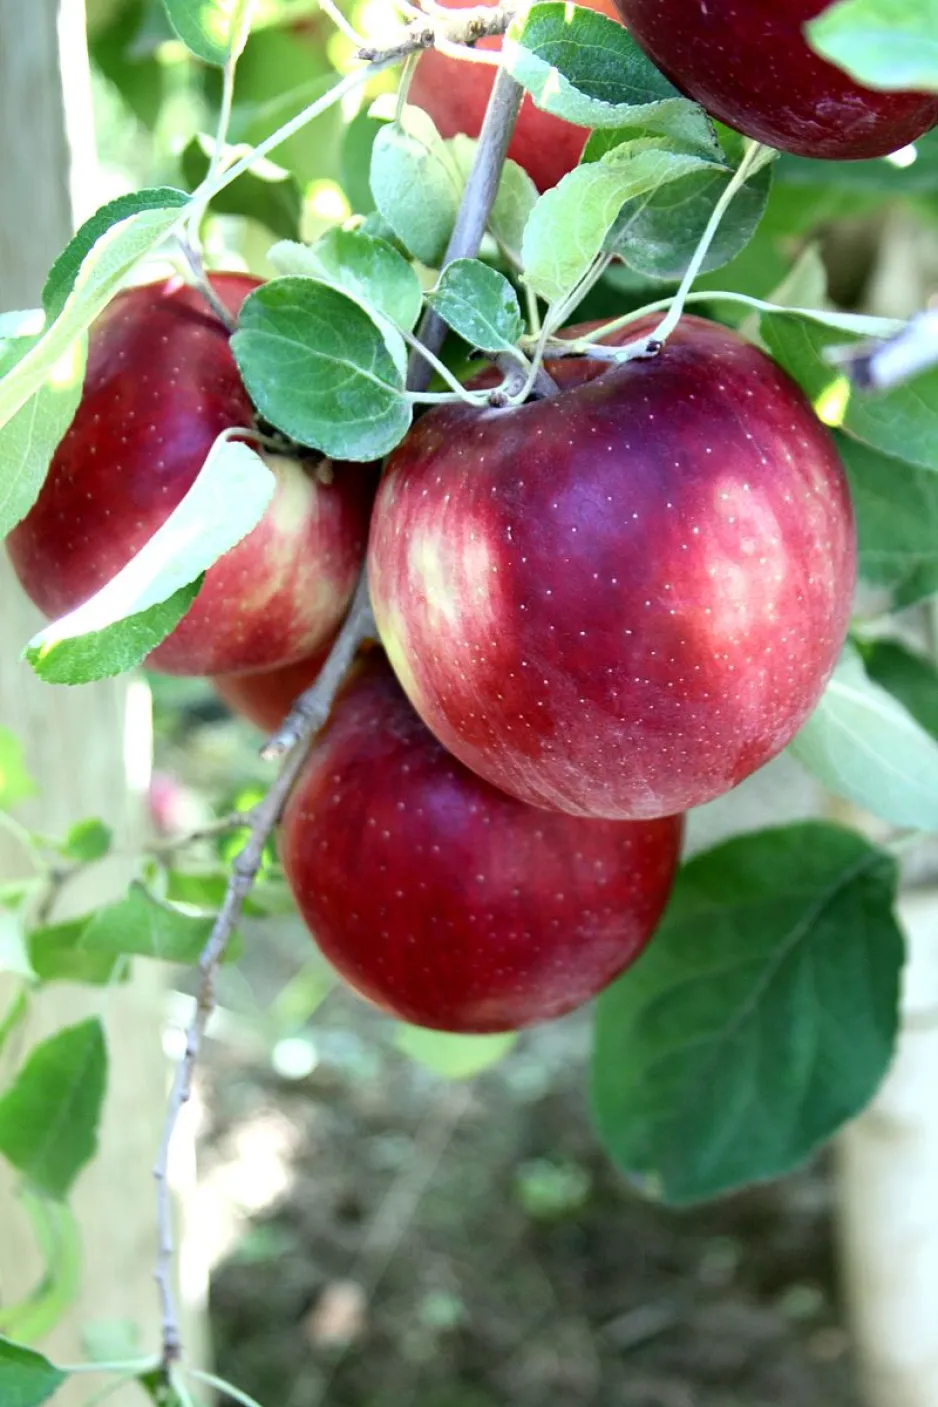 Several red Cosmic Crisp apples on a branch, among green leaves.